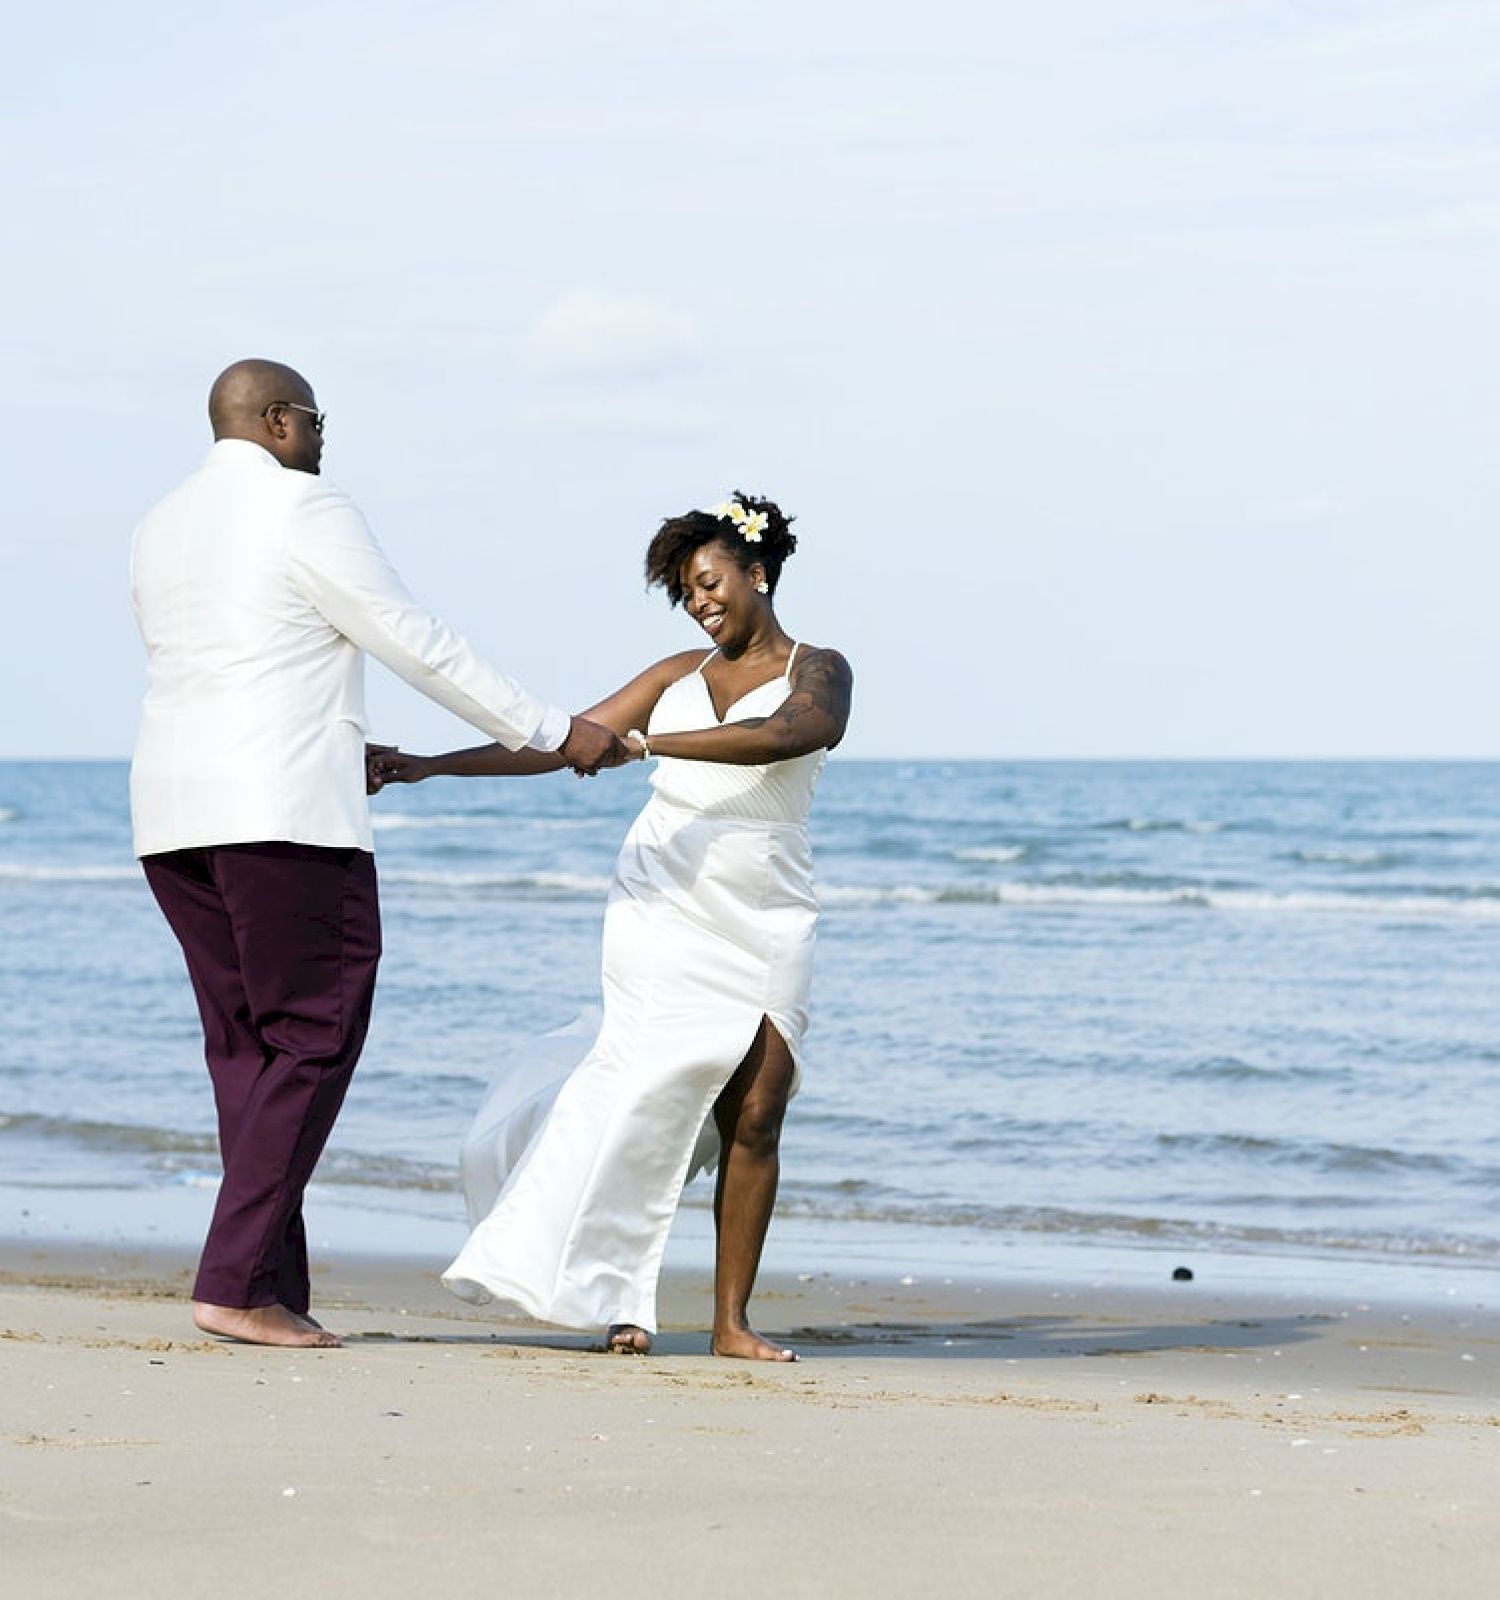 A couple is holding hands on the beach, likely celebrating a special occasion.